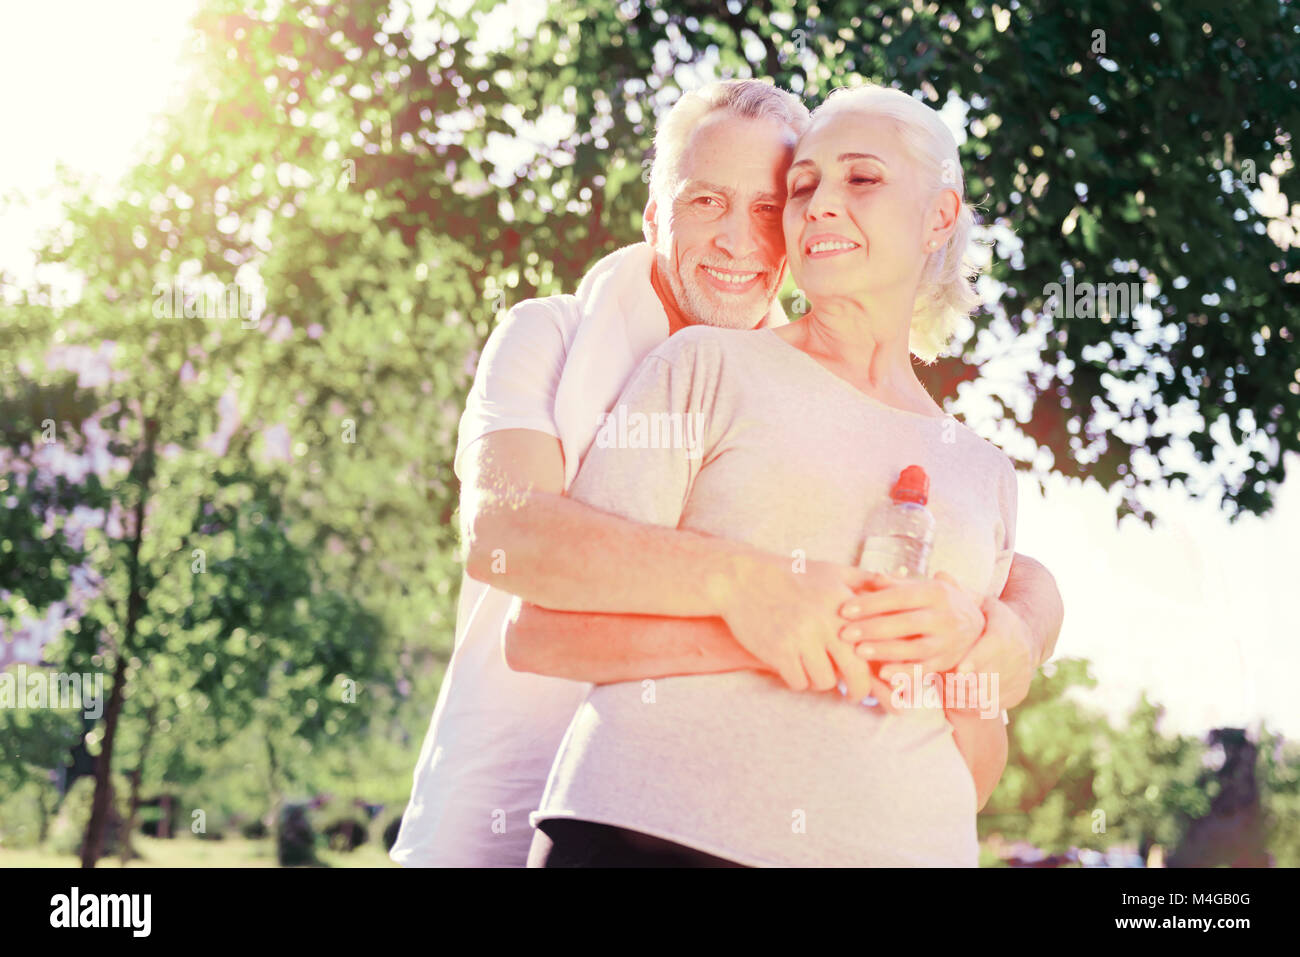 Smiling husband hugging his wife Stock Photo